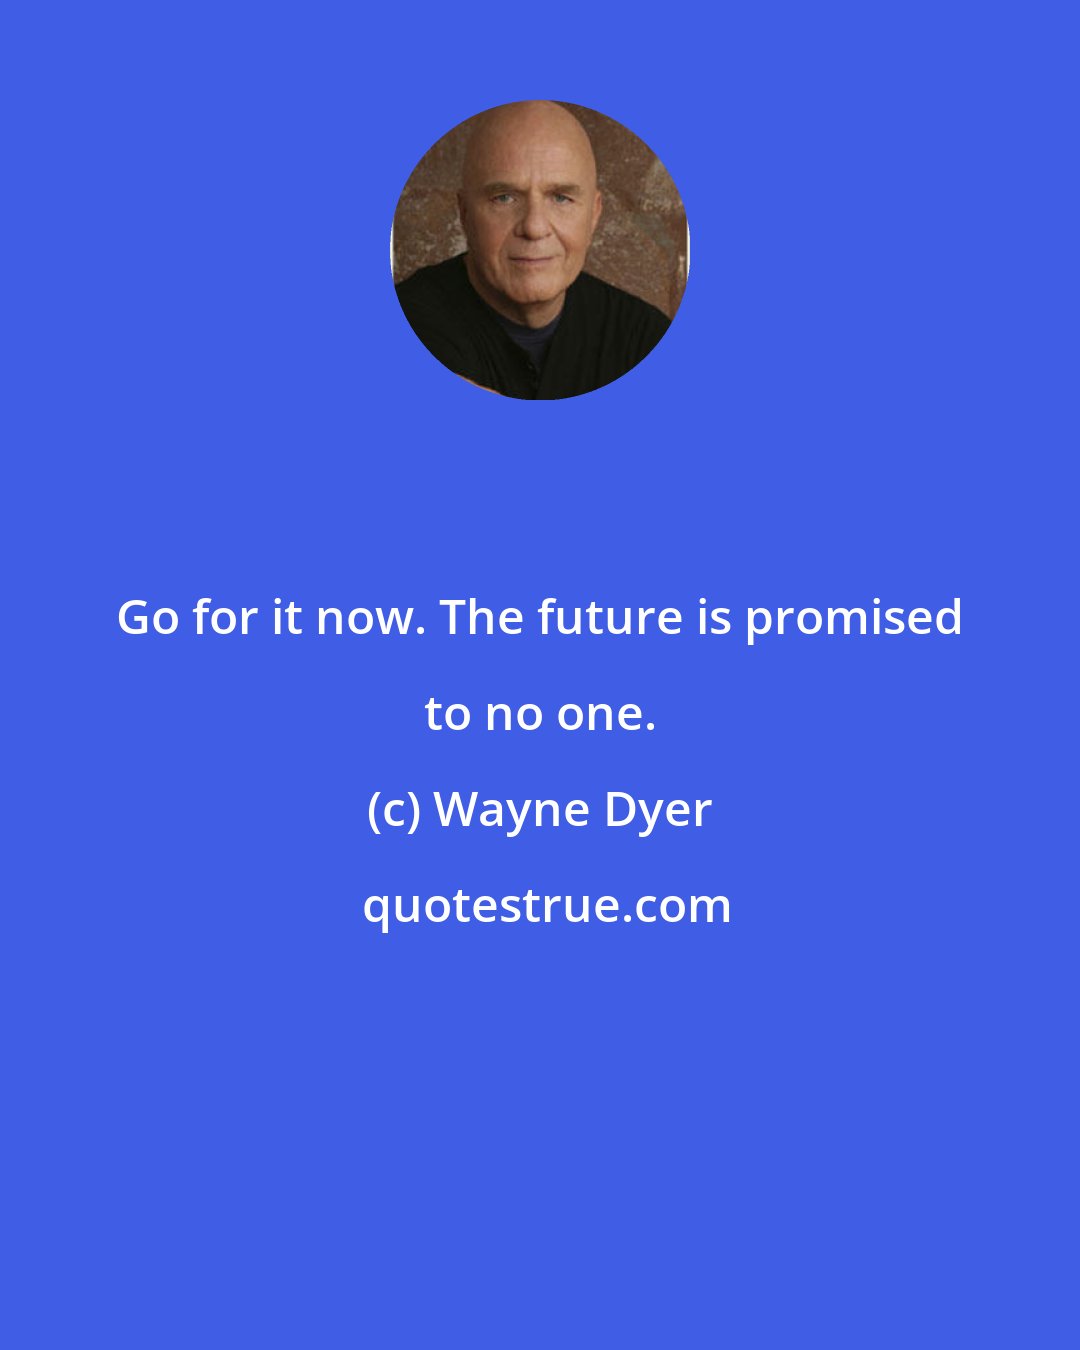 Wayne Dyer: Go for it now. The future is promised to no one.